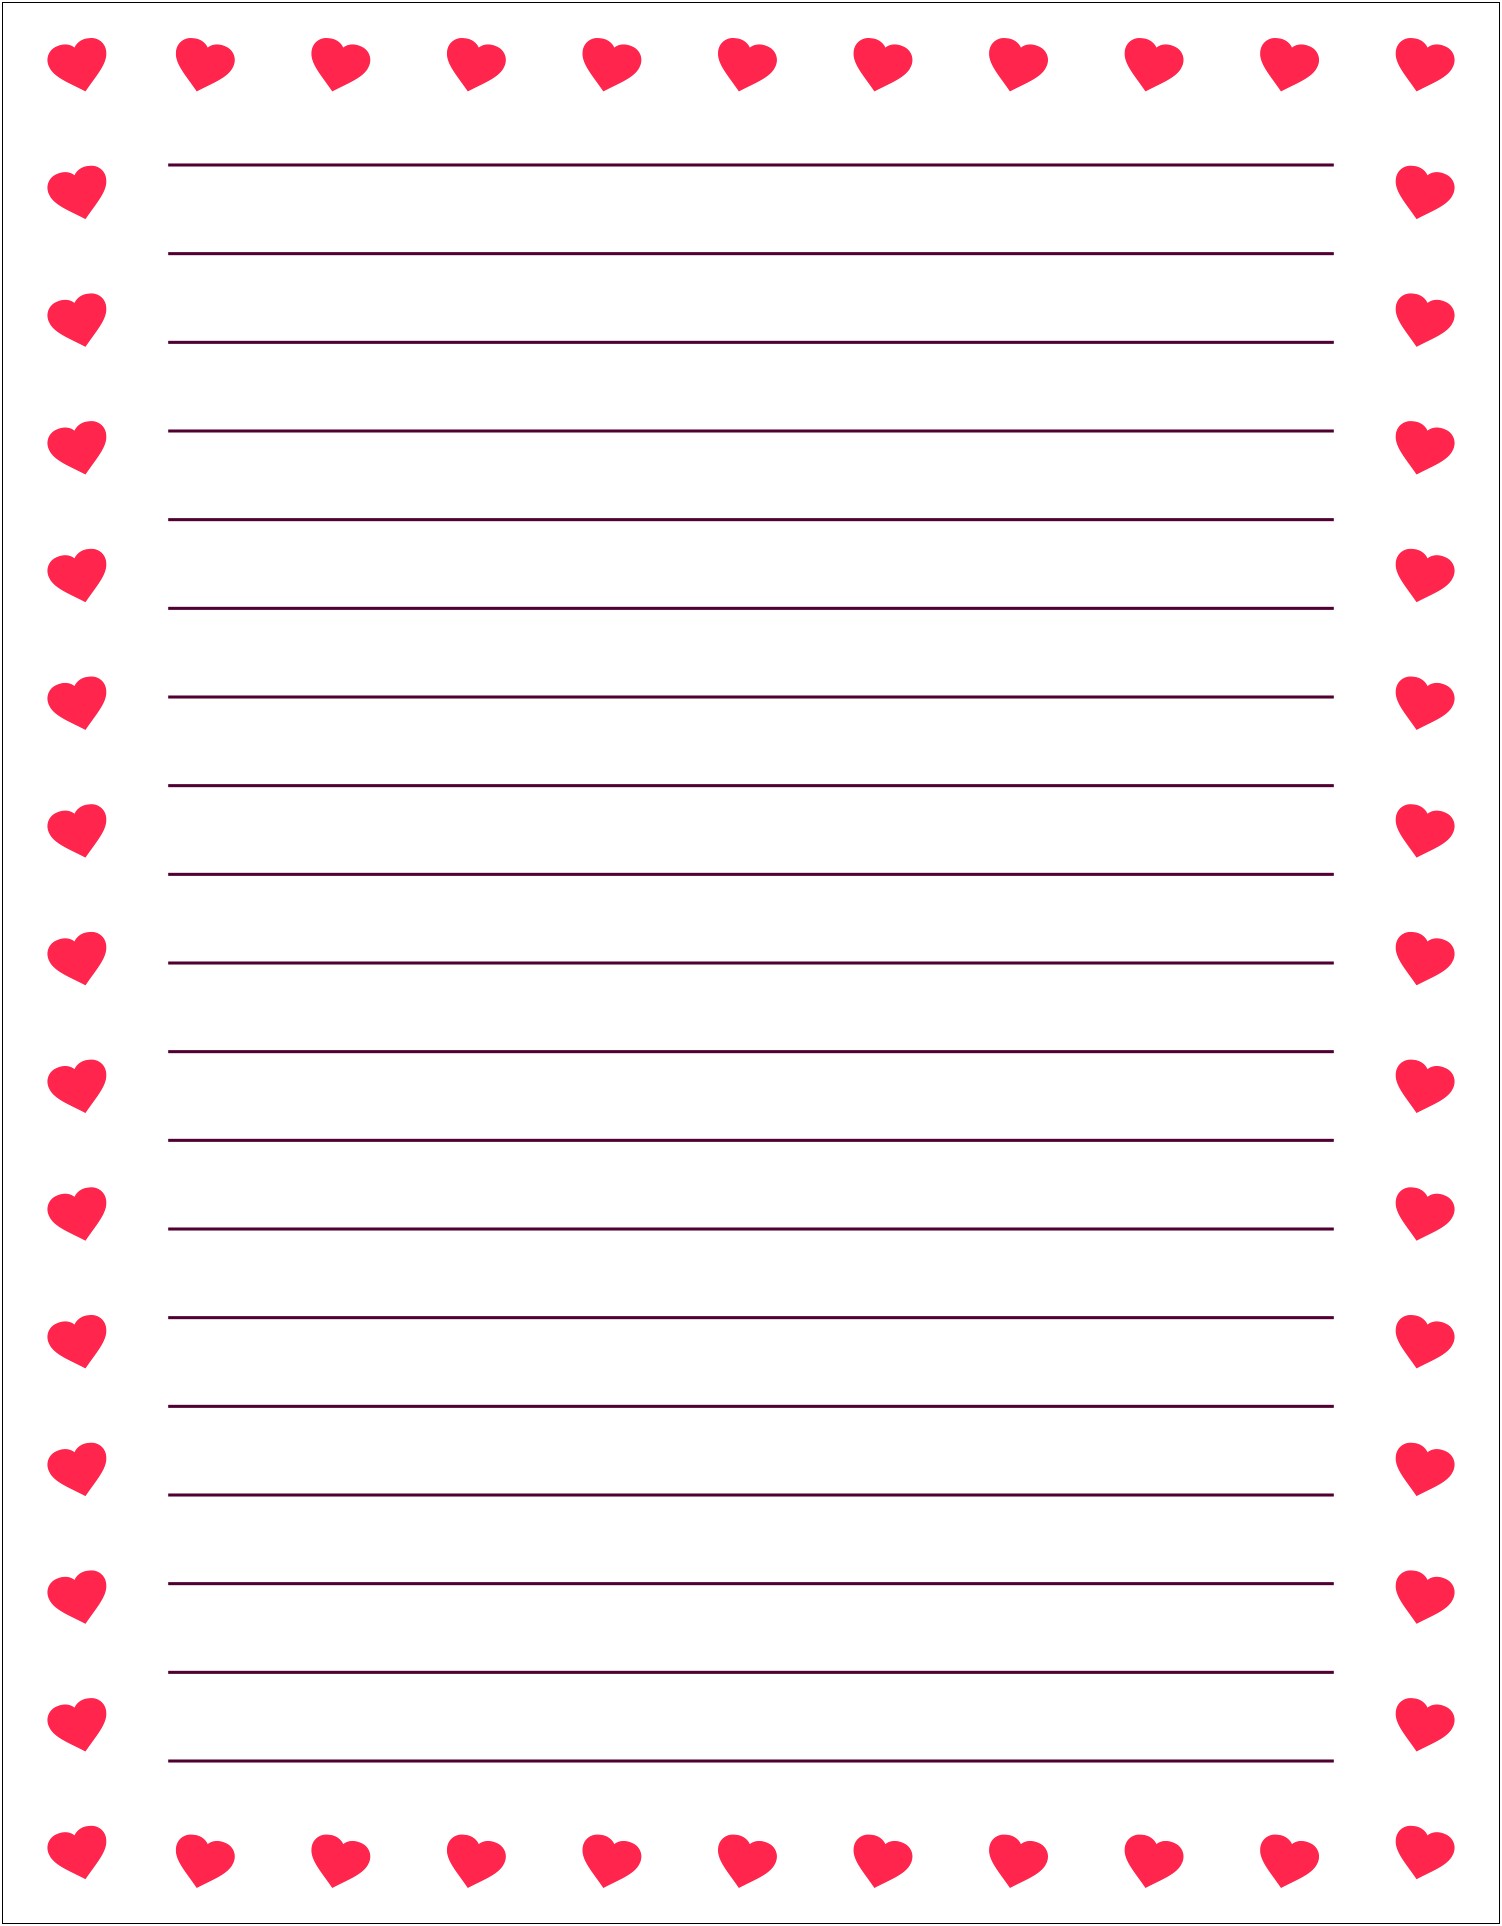 Free Printable Hearts Border Letter Stationery Templates